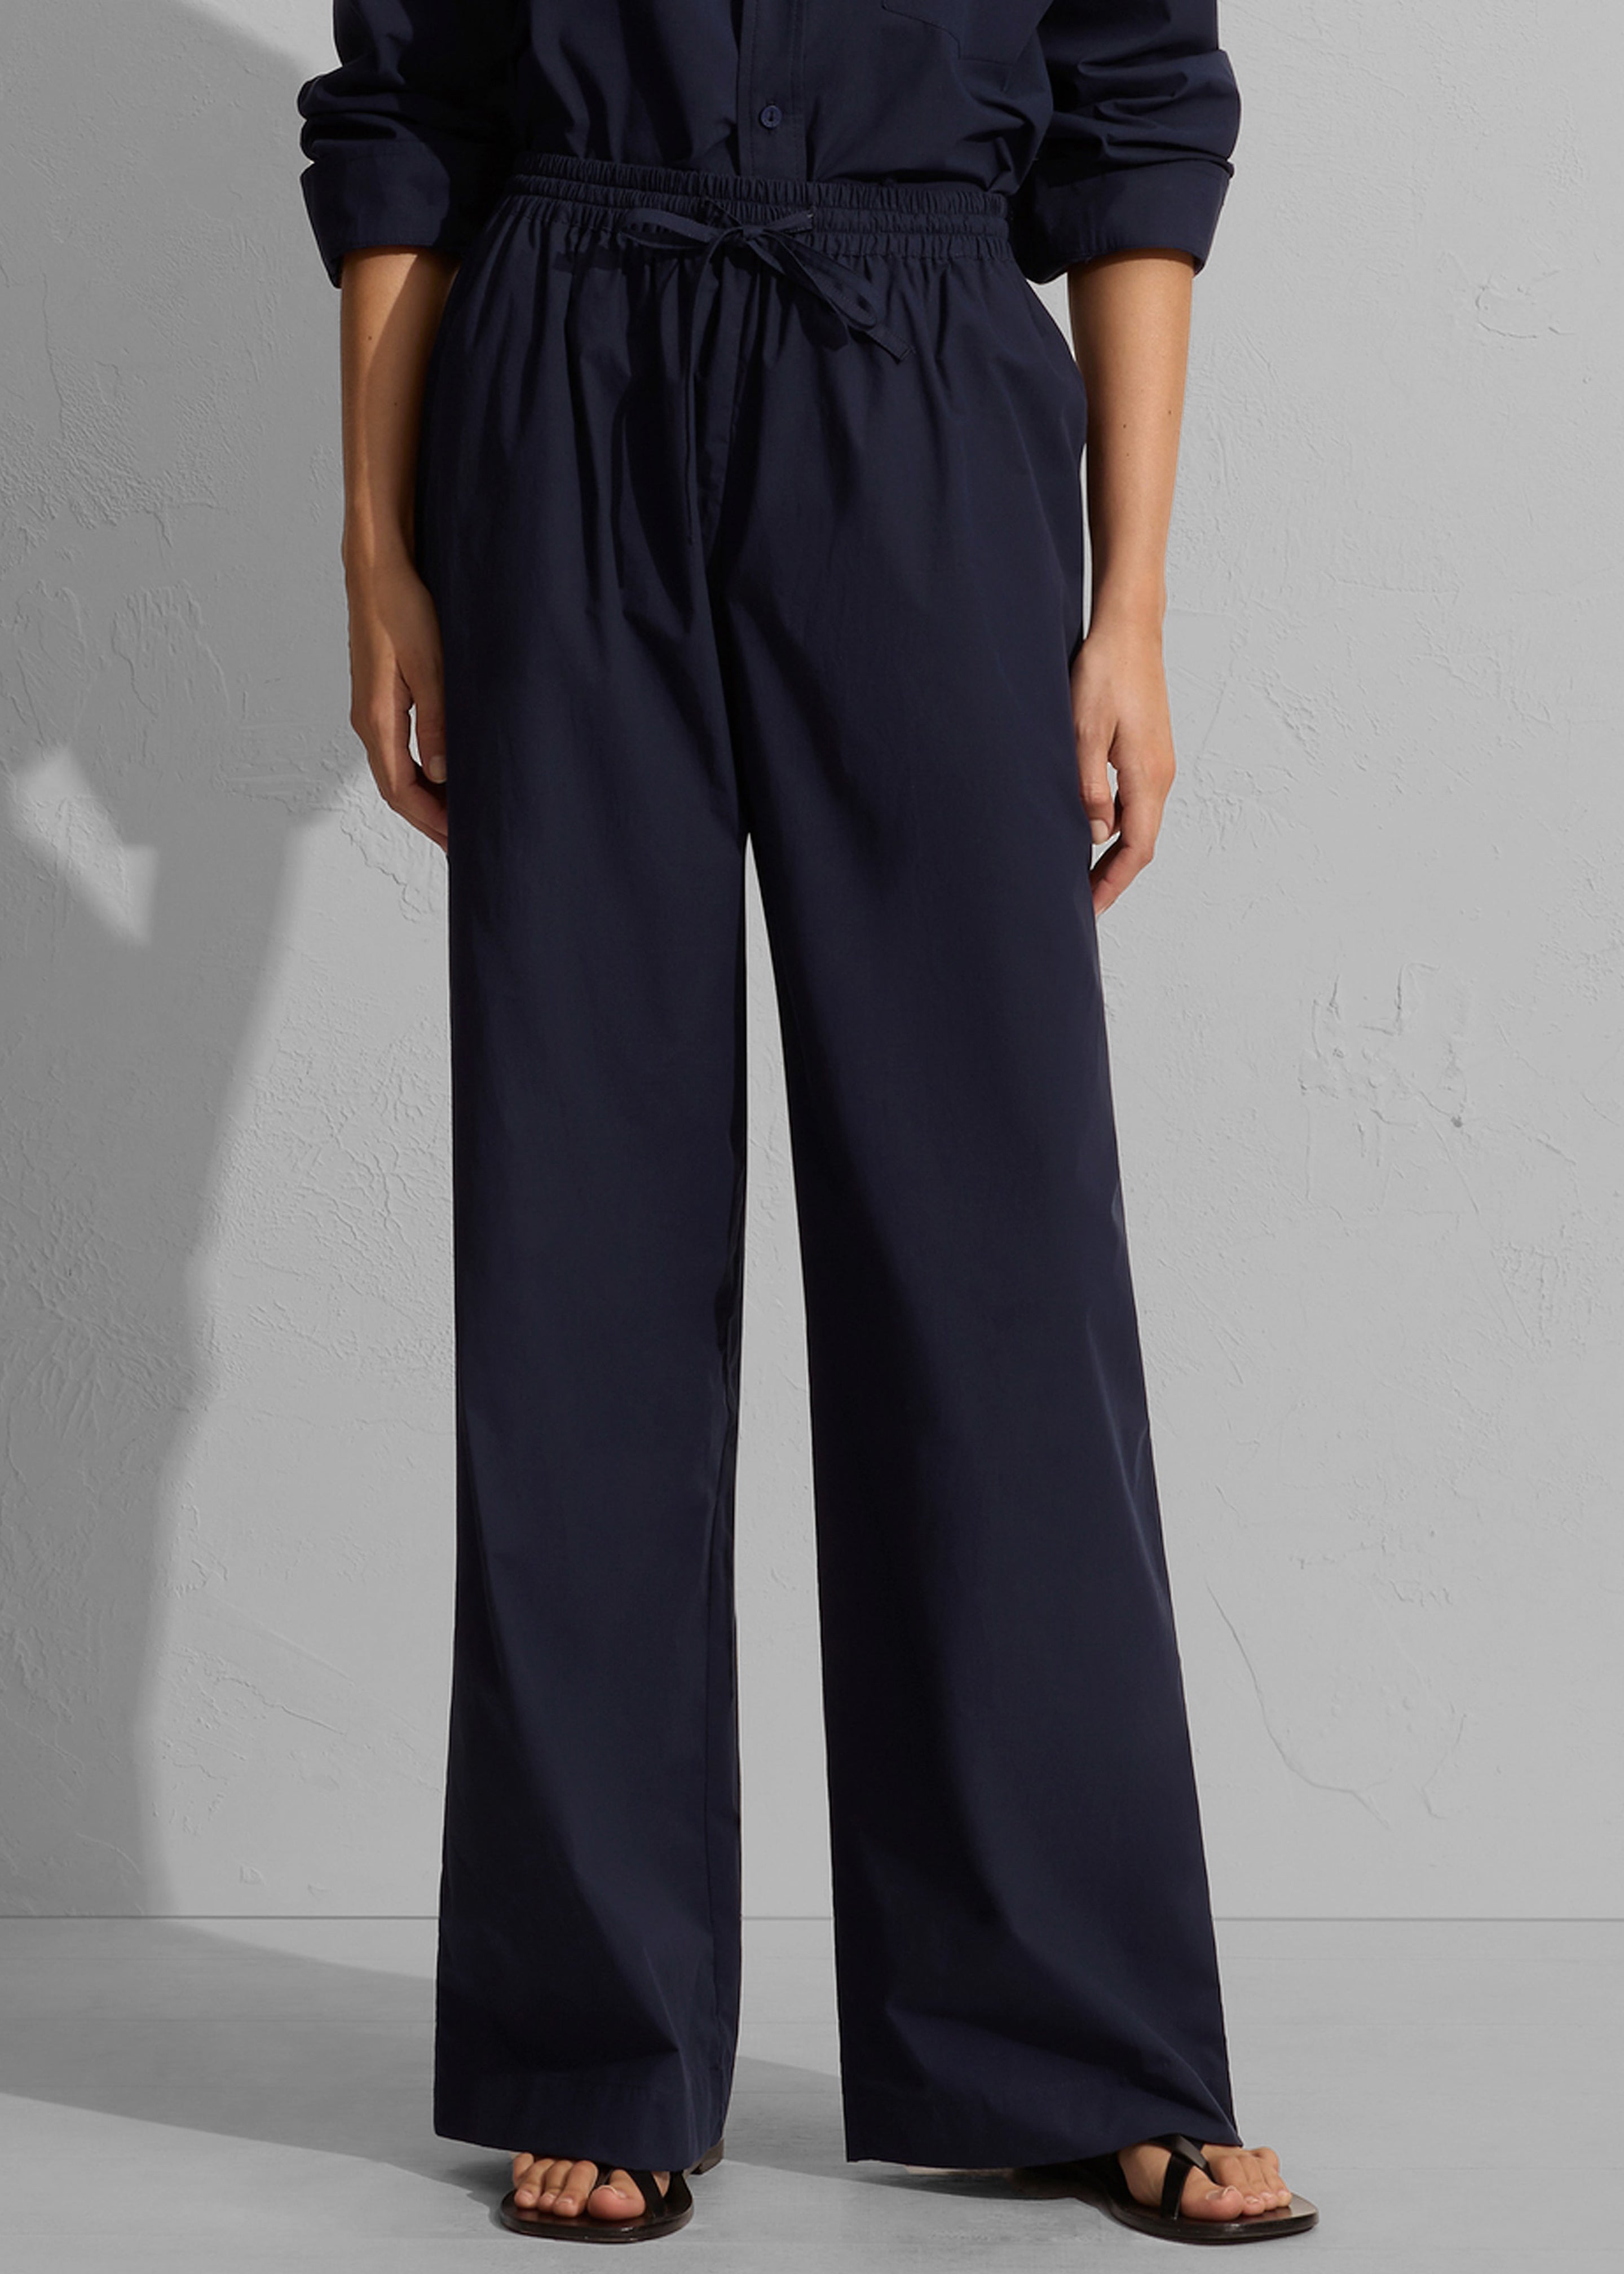 Matteau Relaxed Pant - Navy - 2